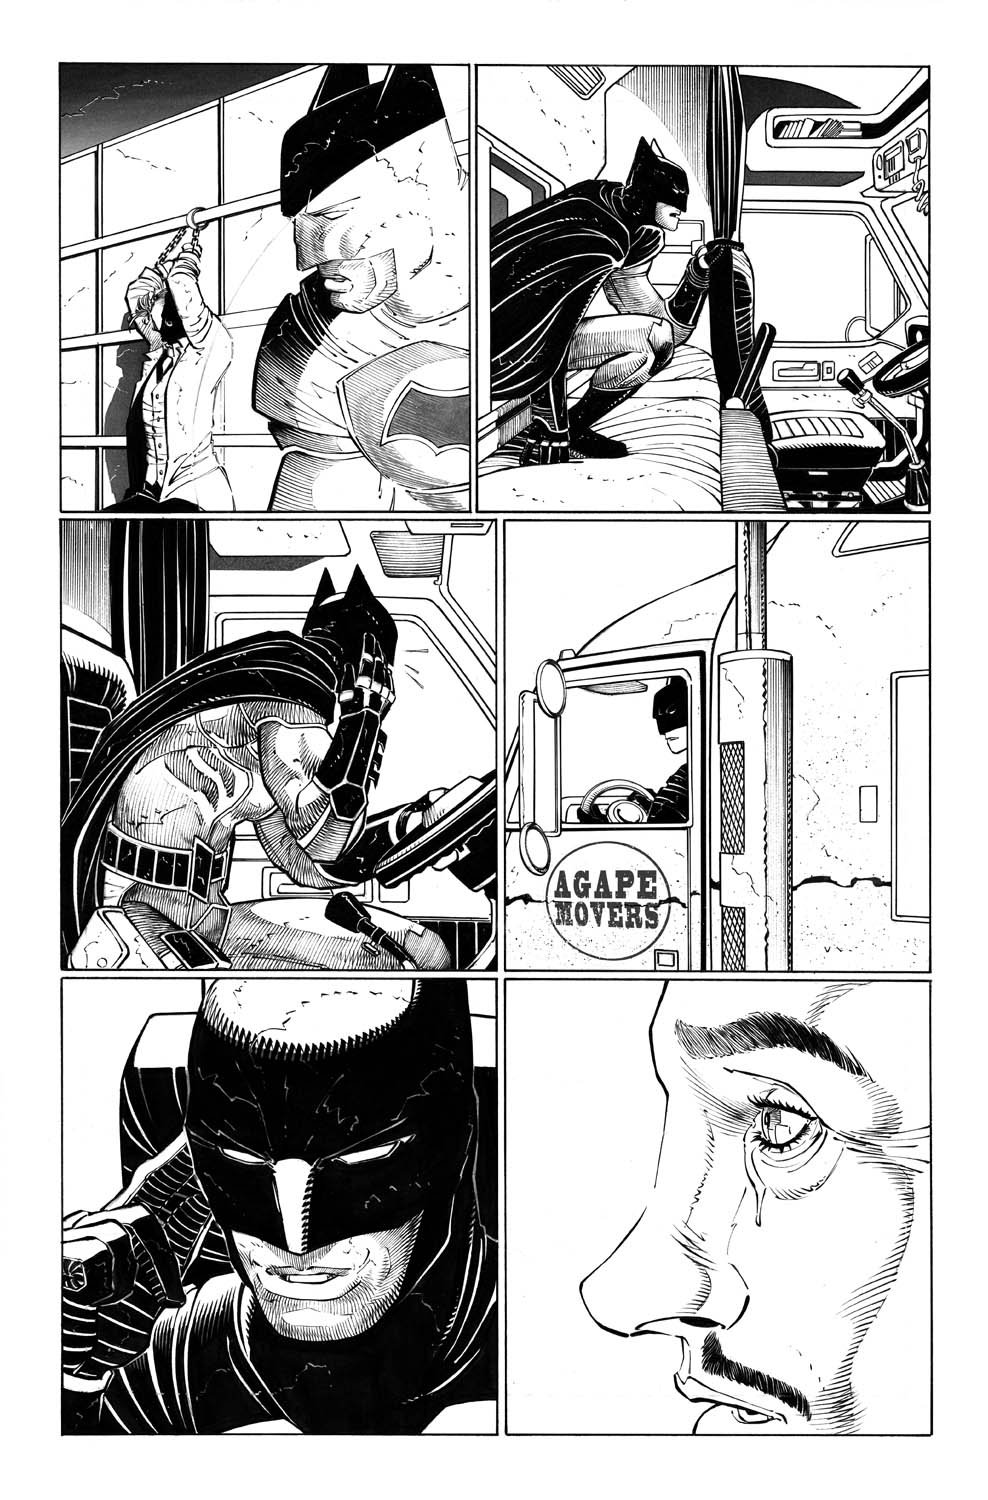 All Star Batman#1 Page #23 by John Romita Jr. and Danny Miki!, in Nick -  Barry - Matt - Hal - Namor's My Eclectic Collection Comic Art Gallery Room